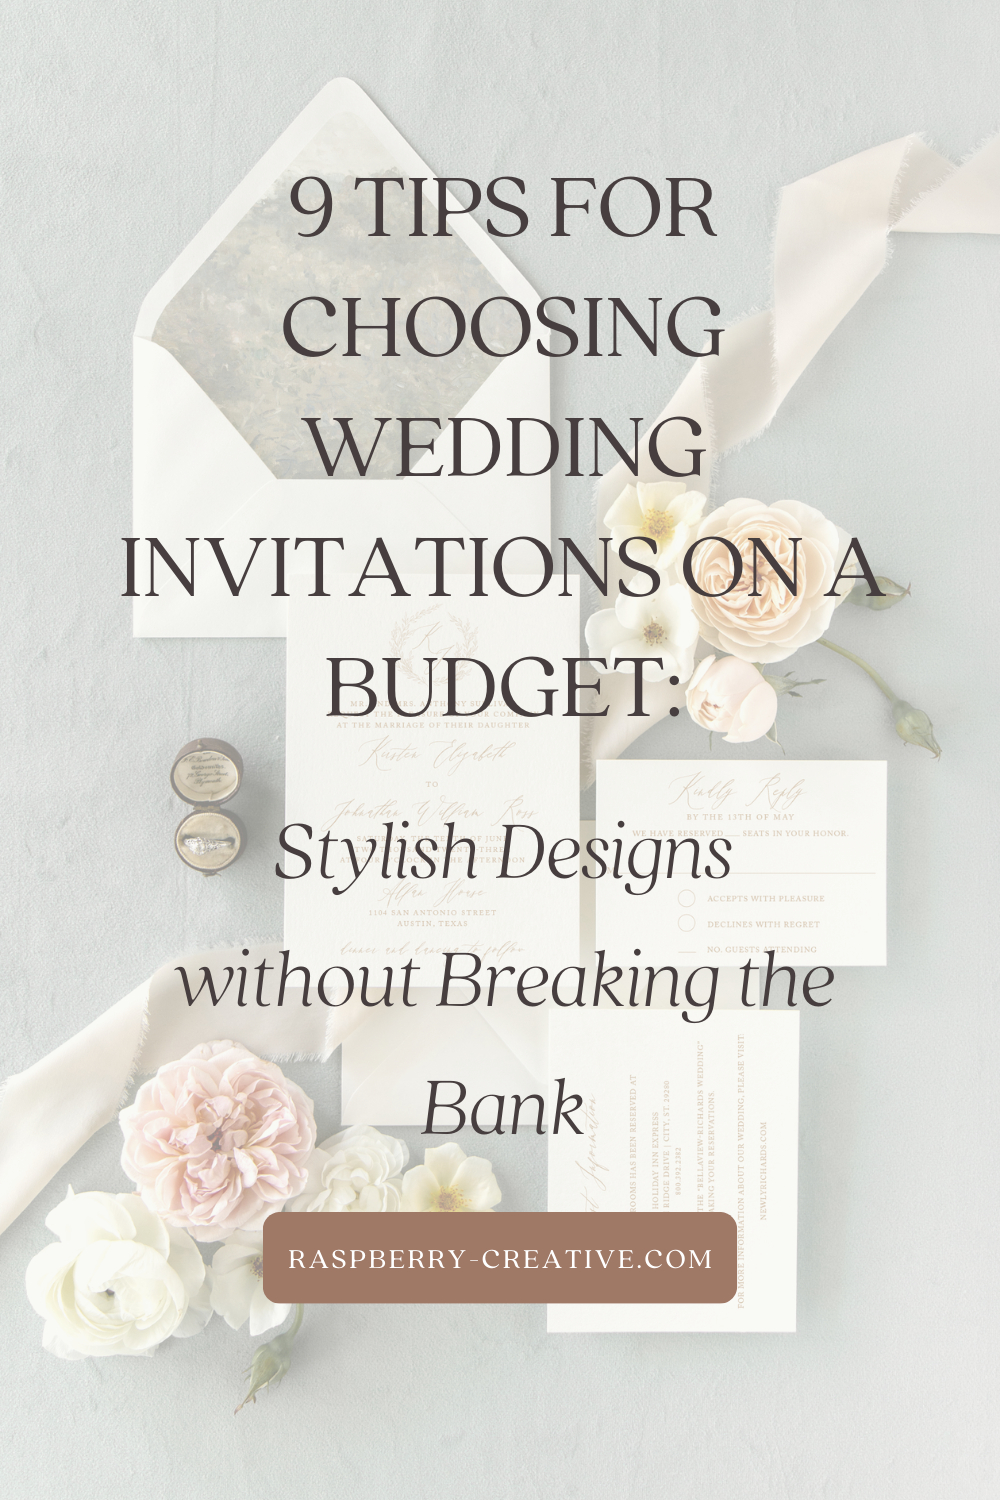 9 Tips for Choosing Wedding Invitations on a Budget: Stylish Designs without Breaking the Bank